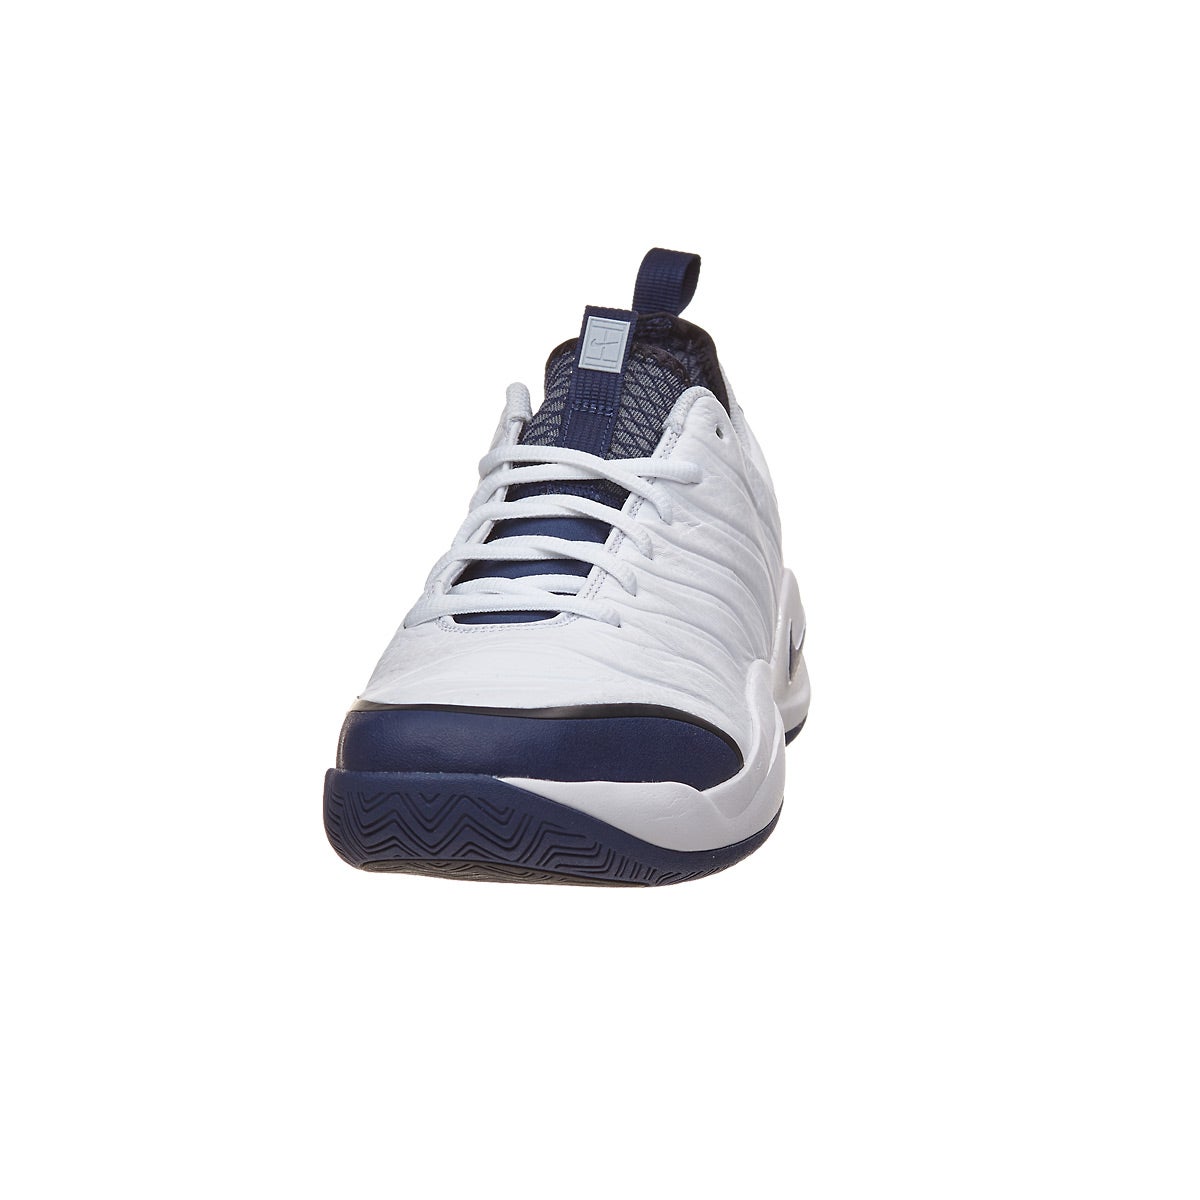 Nike Air Zoom Oscillate White/Navy Men's Shoe 360° View